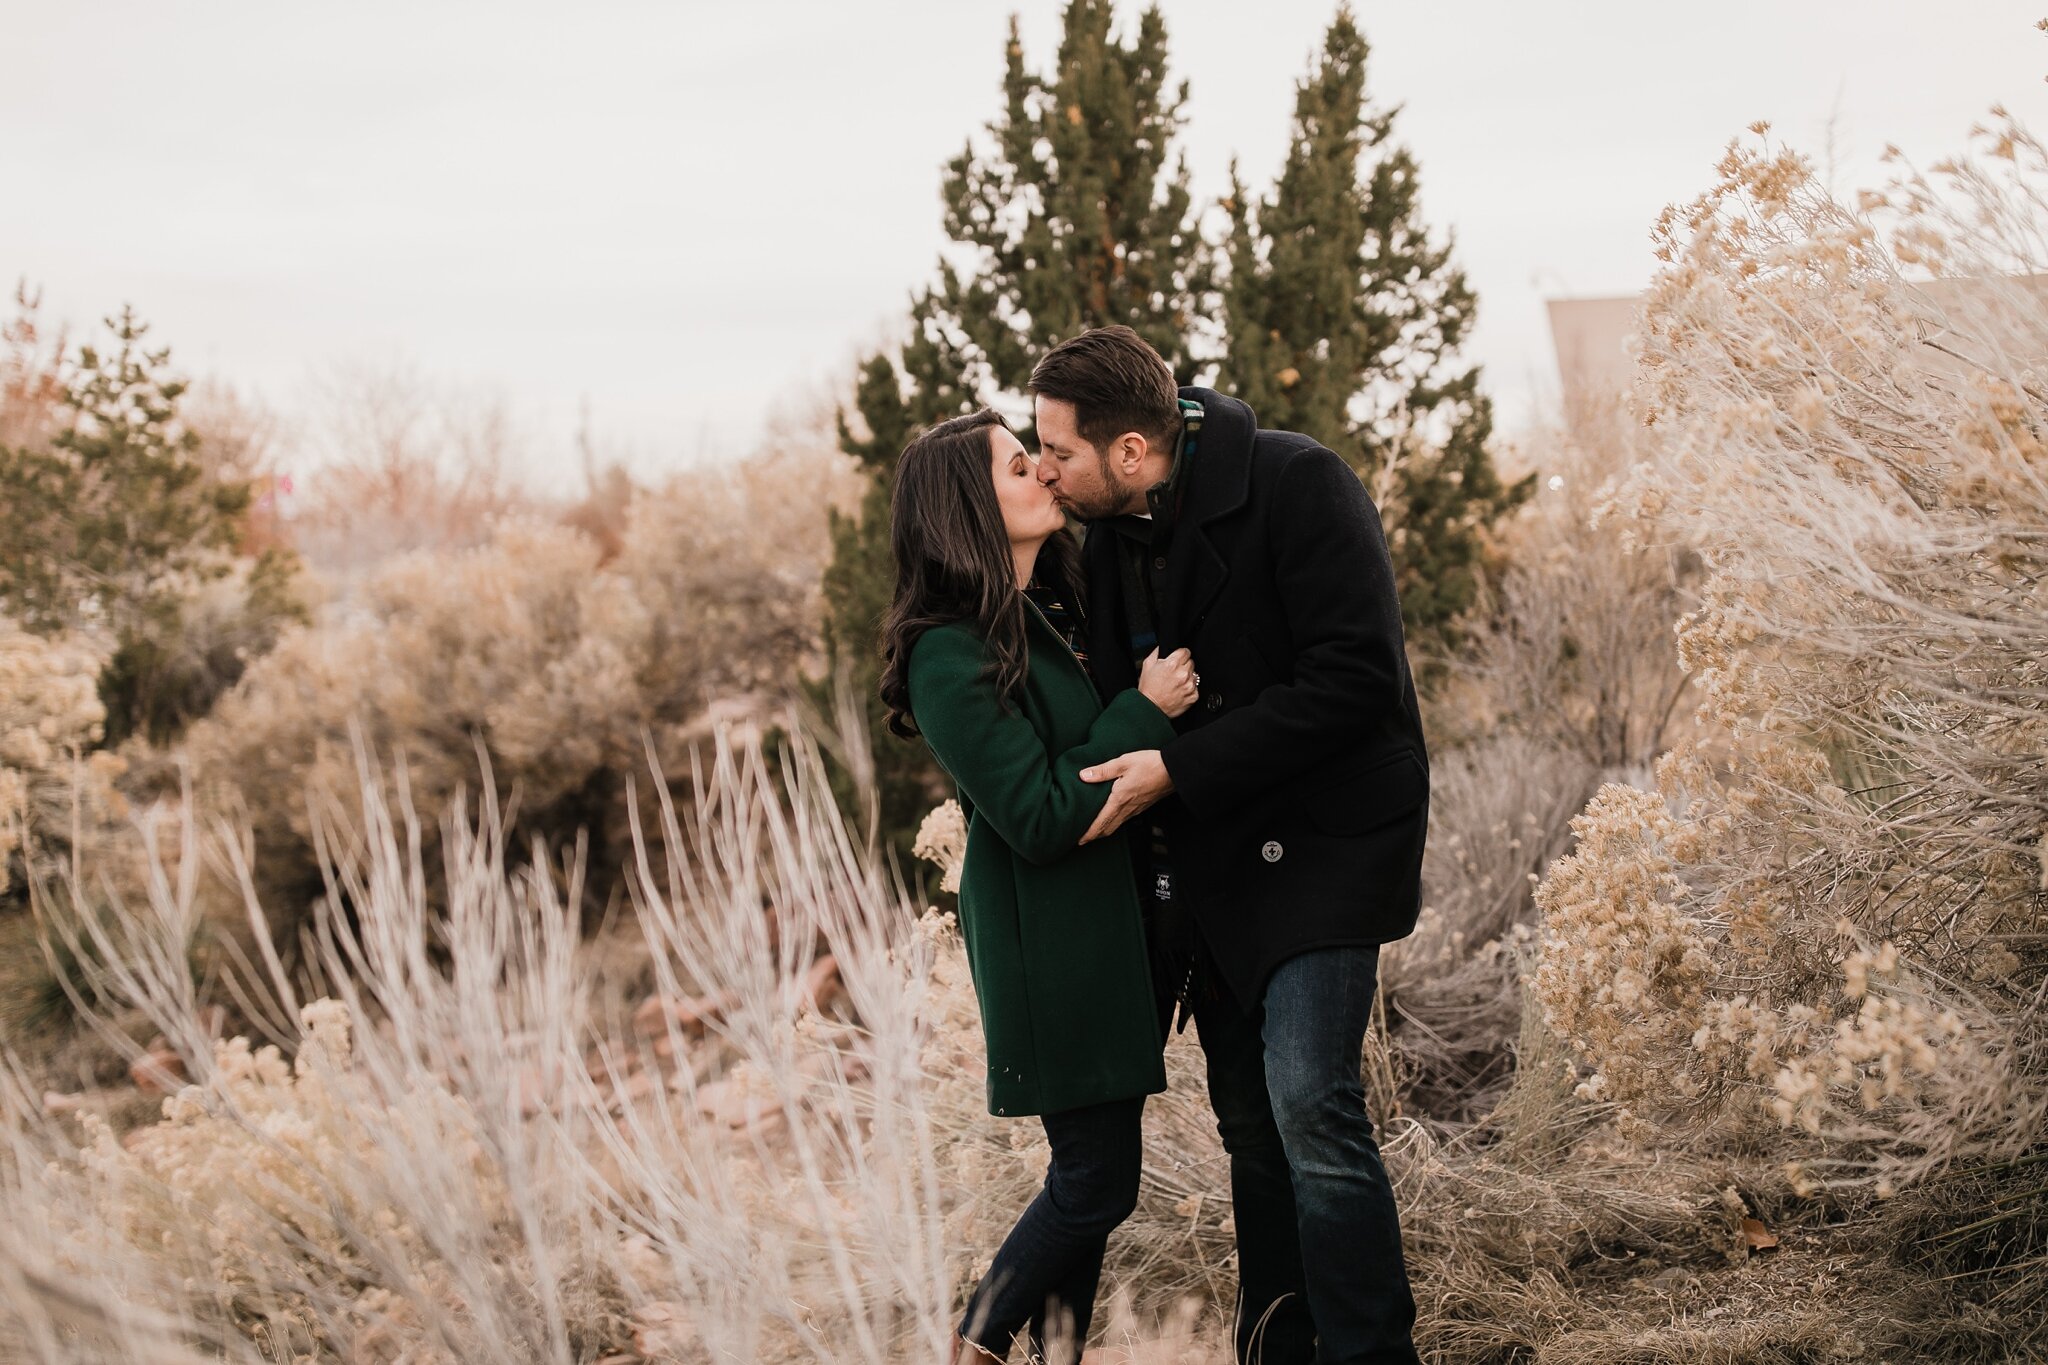 Alicia+lucia+photography+-+albuquerque+wedding+photographer+-+santa+fe+wedding+photography+-+new+mexico+wedding+photographer+-+new+mexico+wedding+-+albuquerque+engagement+-+old+town+engagement+-+christmas+engagement+-+holiday+engagement_0034.jpg